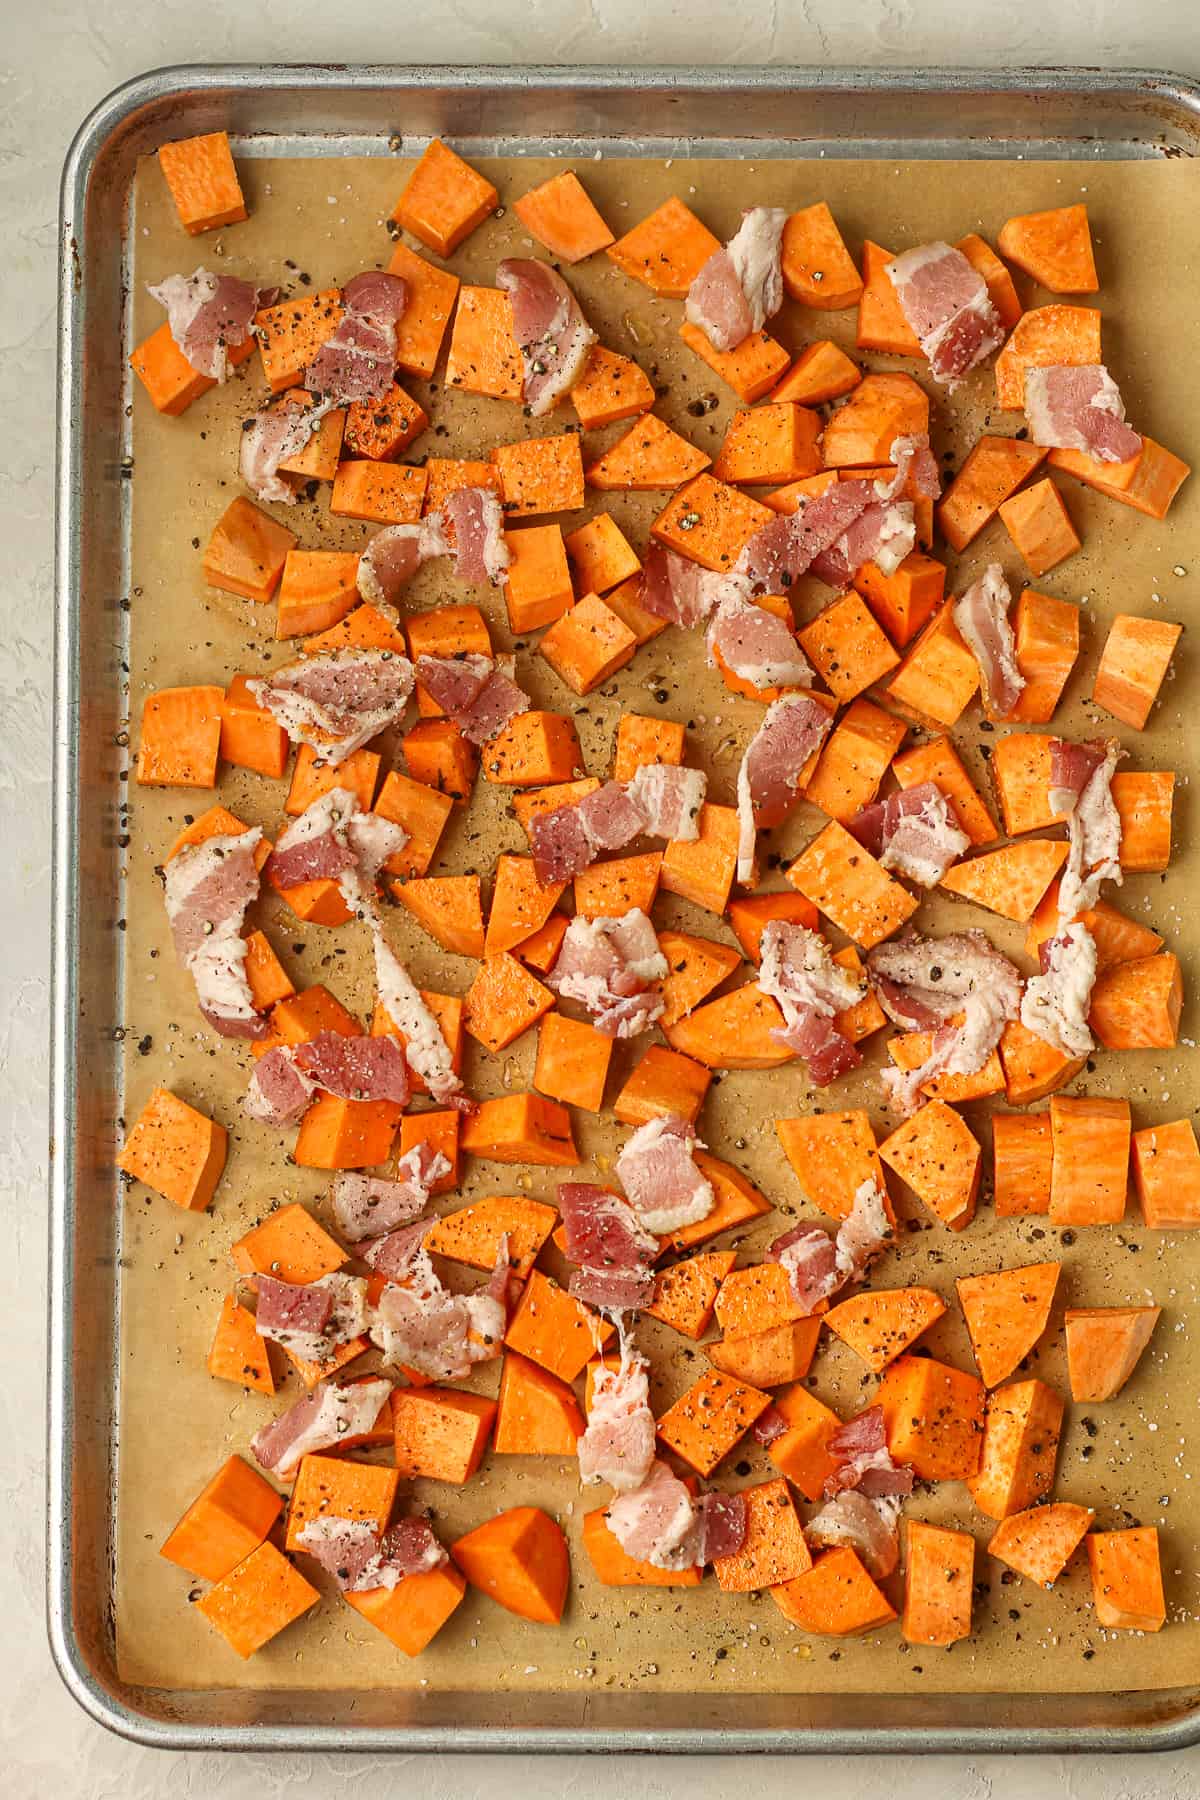 Chopped sweet potatoes with bacon before roasting.